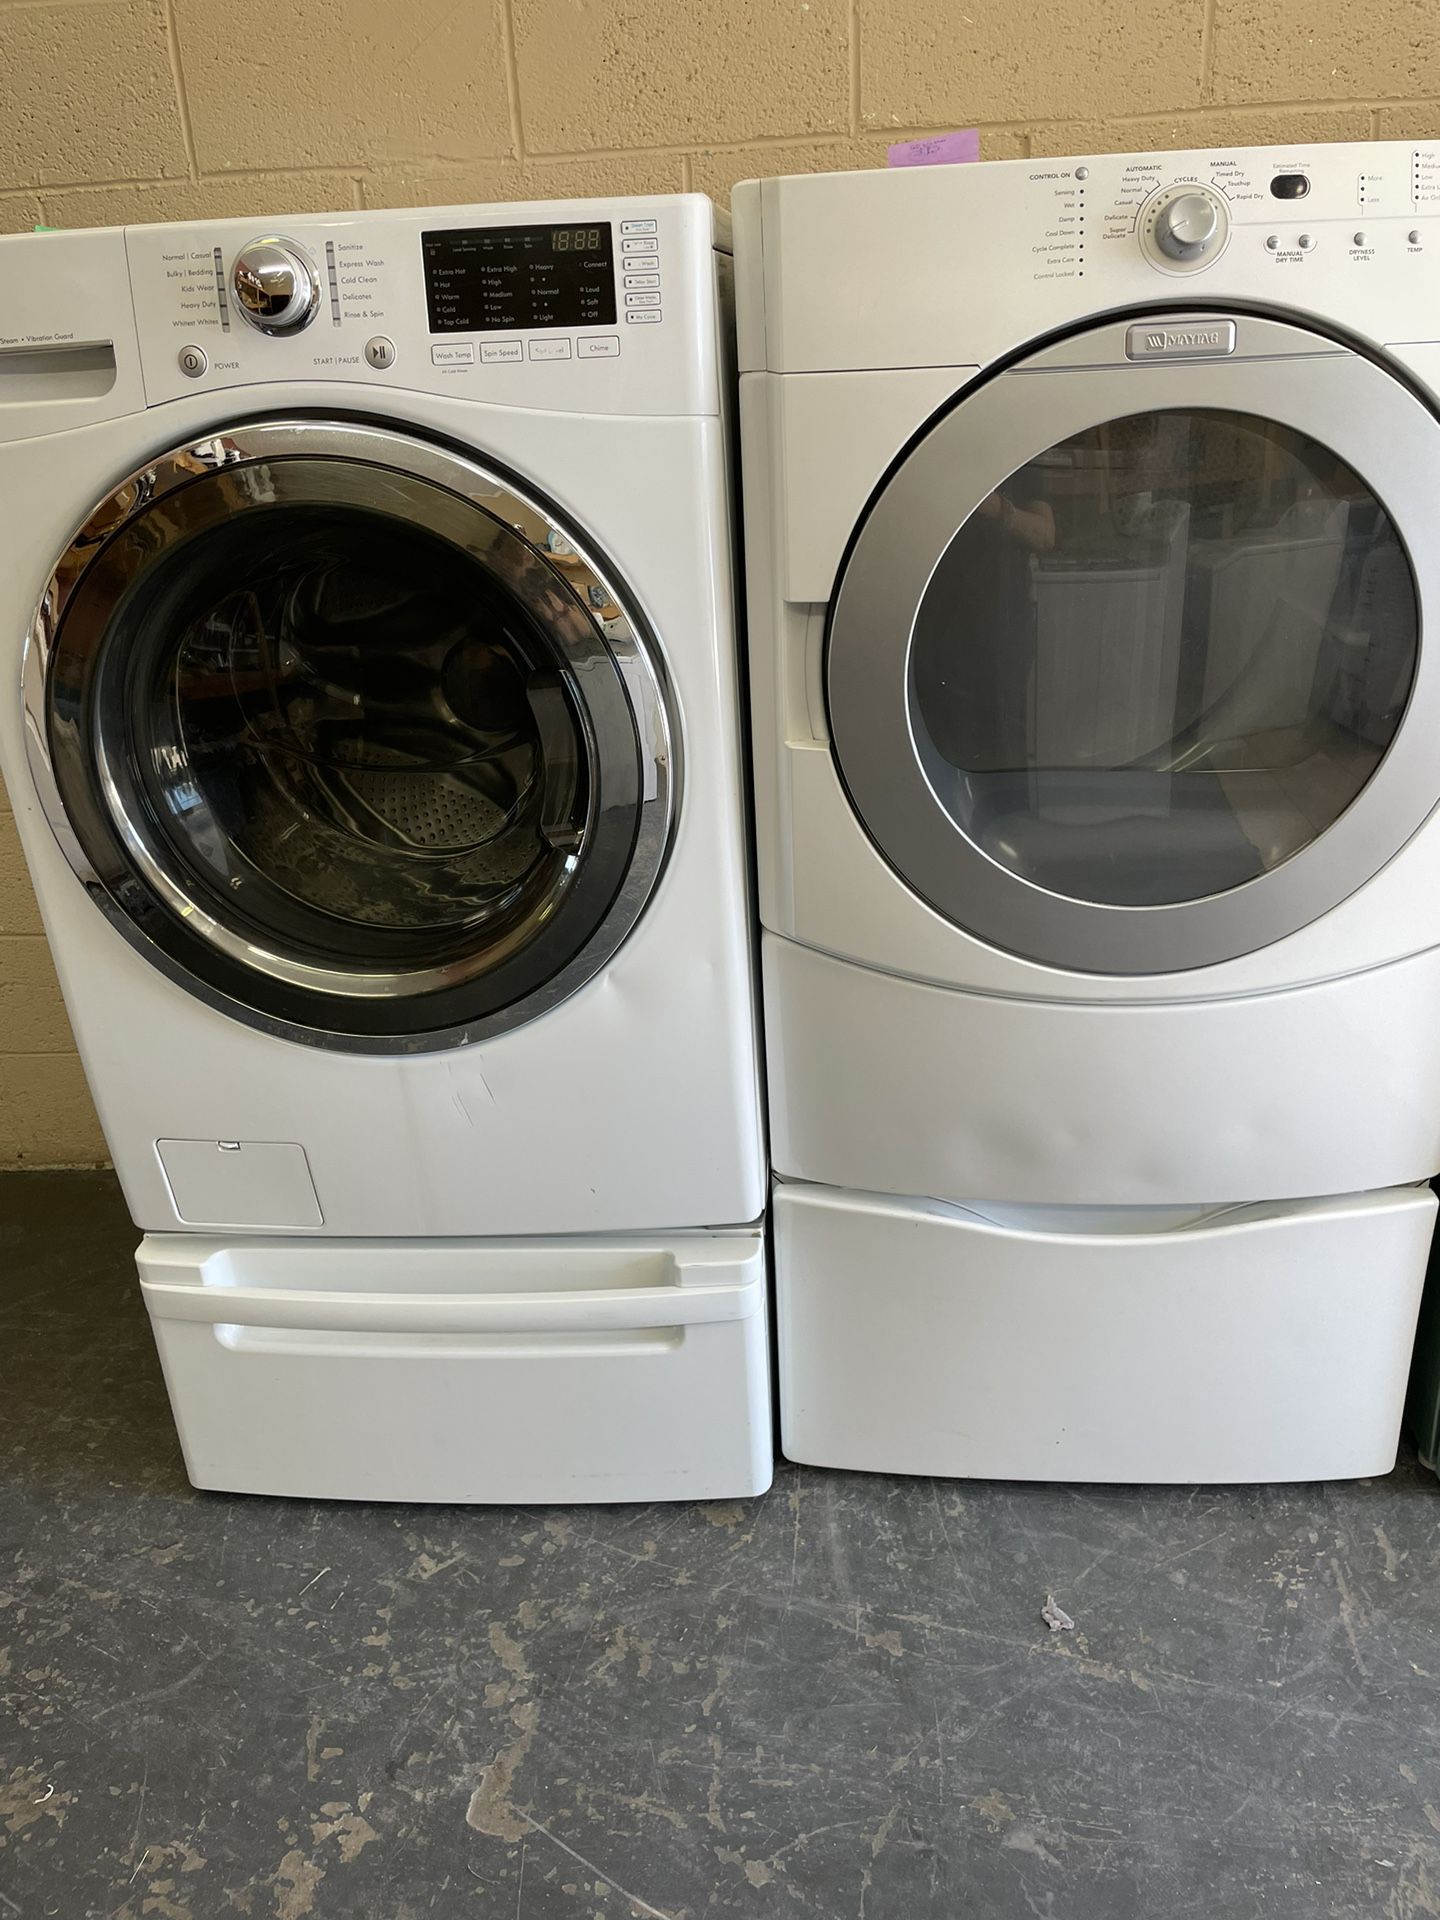 Kenmore*4.0cu.ft Capacity Washer and Maytag*7.3cu.ft Capacity Gas Dryer Duo+Pedestal